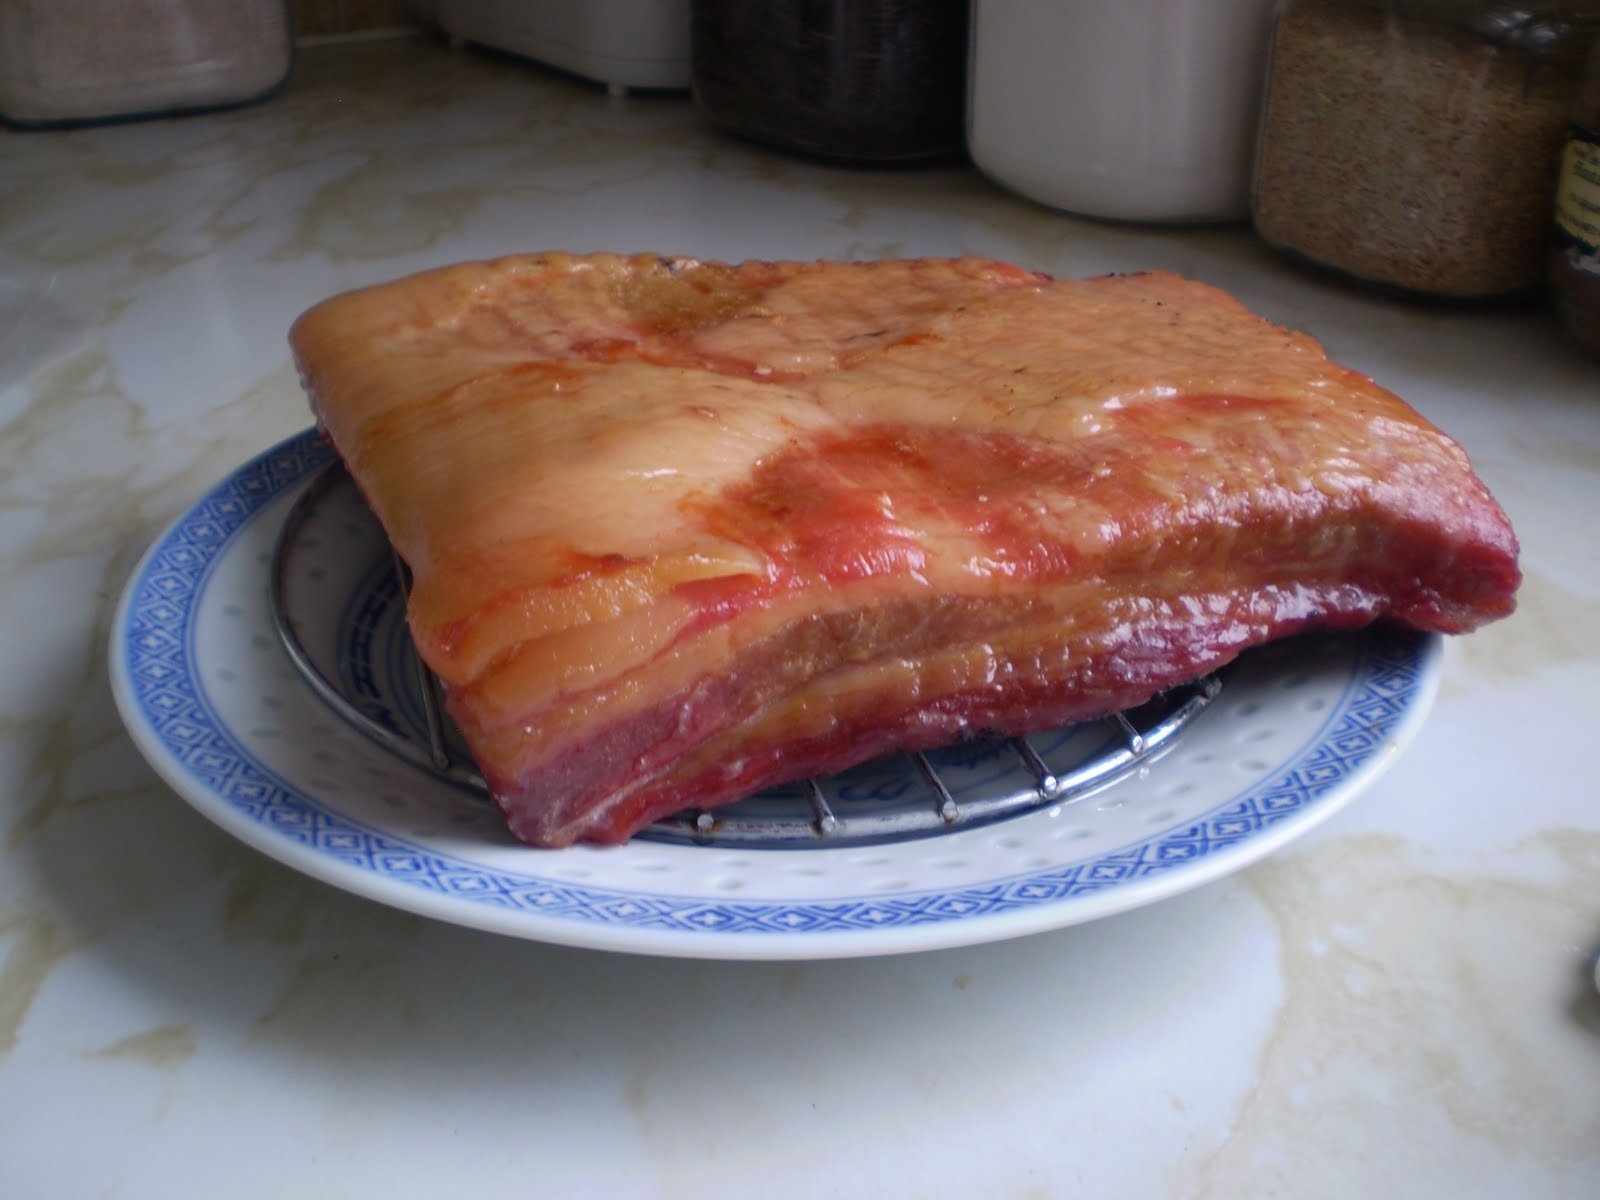 A slab of the finished bacon